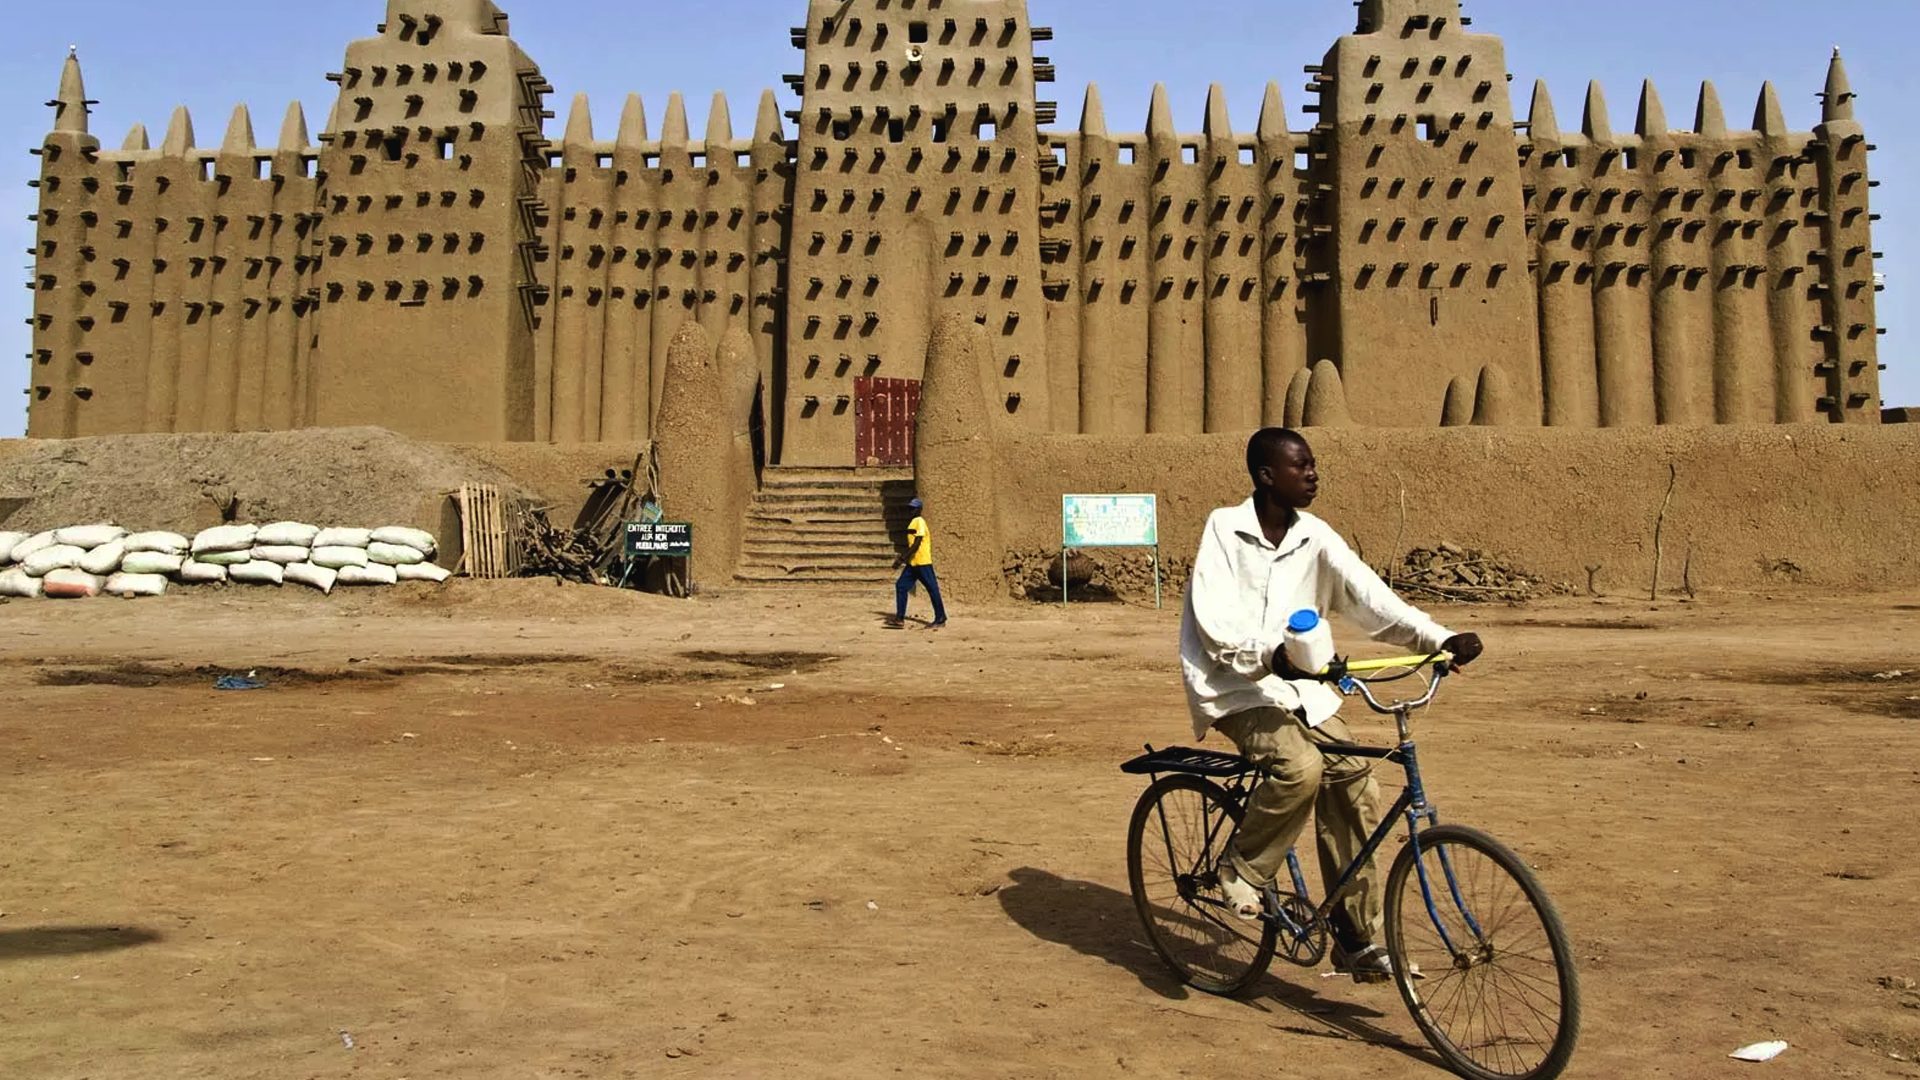 Thousands of displaced children in Mali have no legal identity